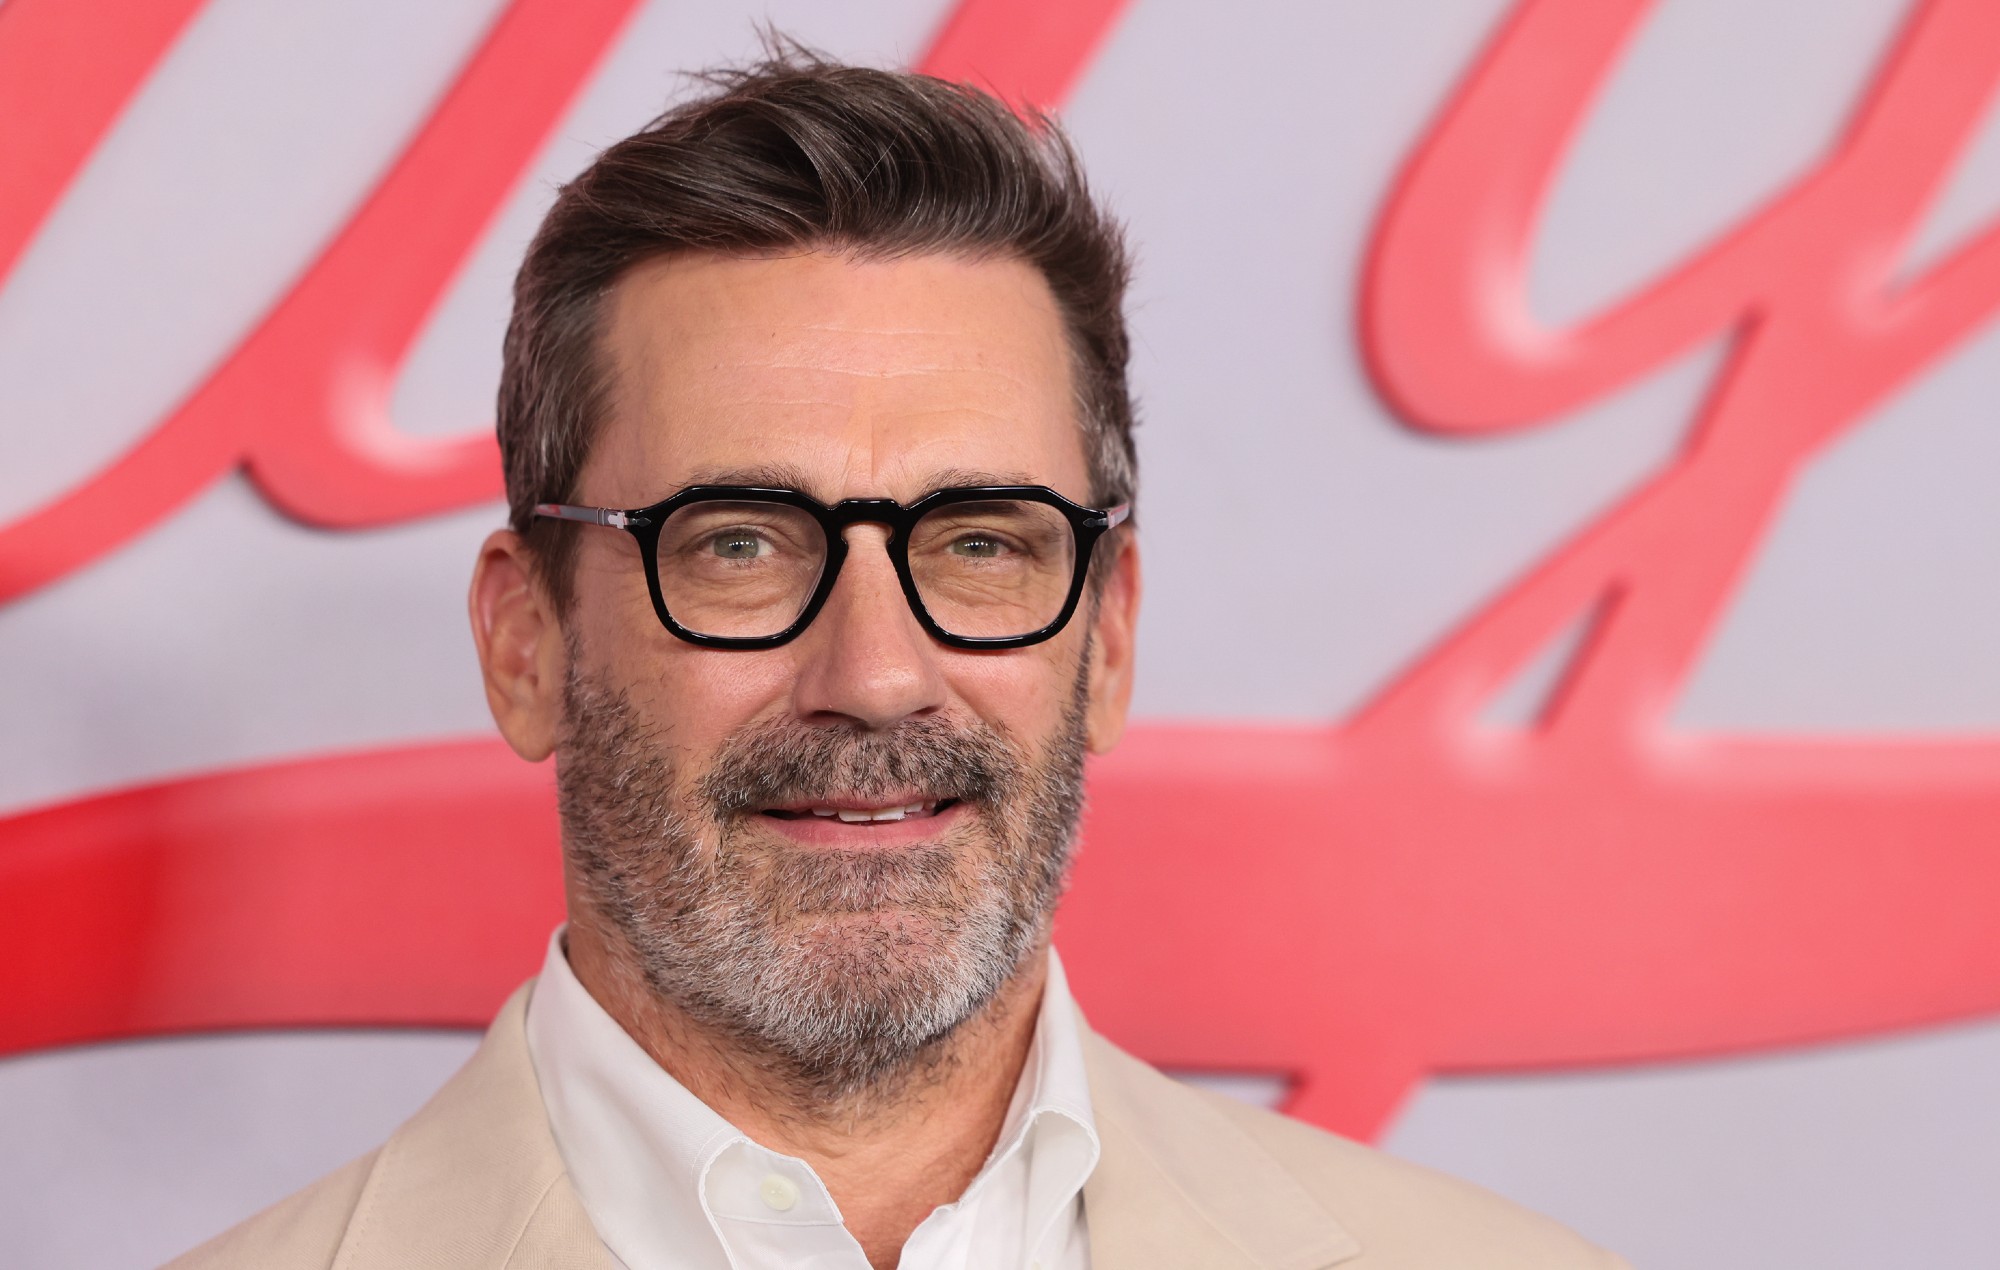 Jon Hamm wants to be “included” in the MCU